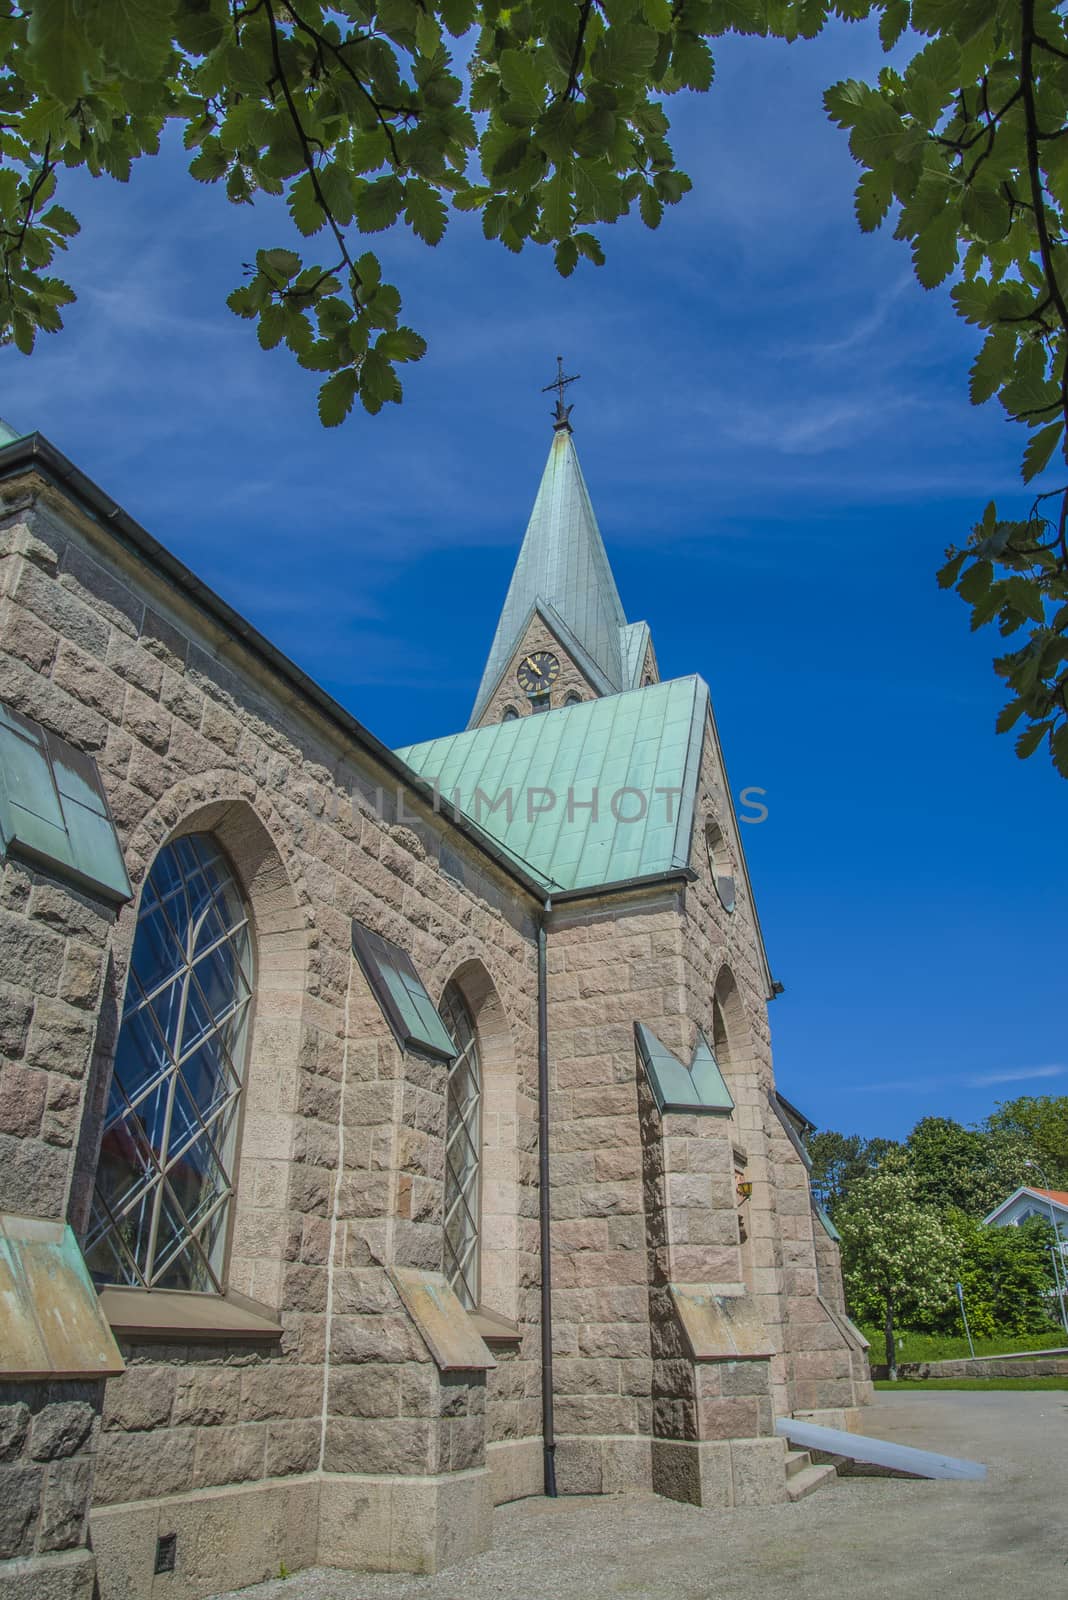 The church in the Gothic Revival style was built in granite and opened in 1892. Grebbestad is a locality situated in Tanum Municipality, V��stra G��taland County, Sweden.